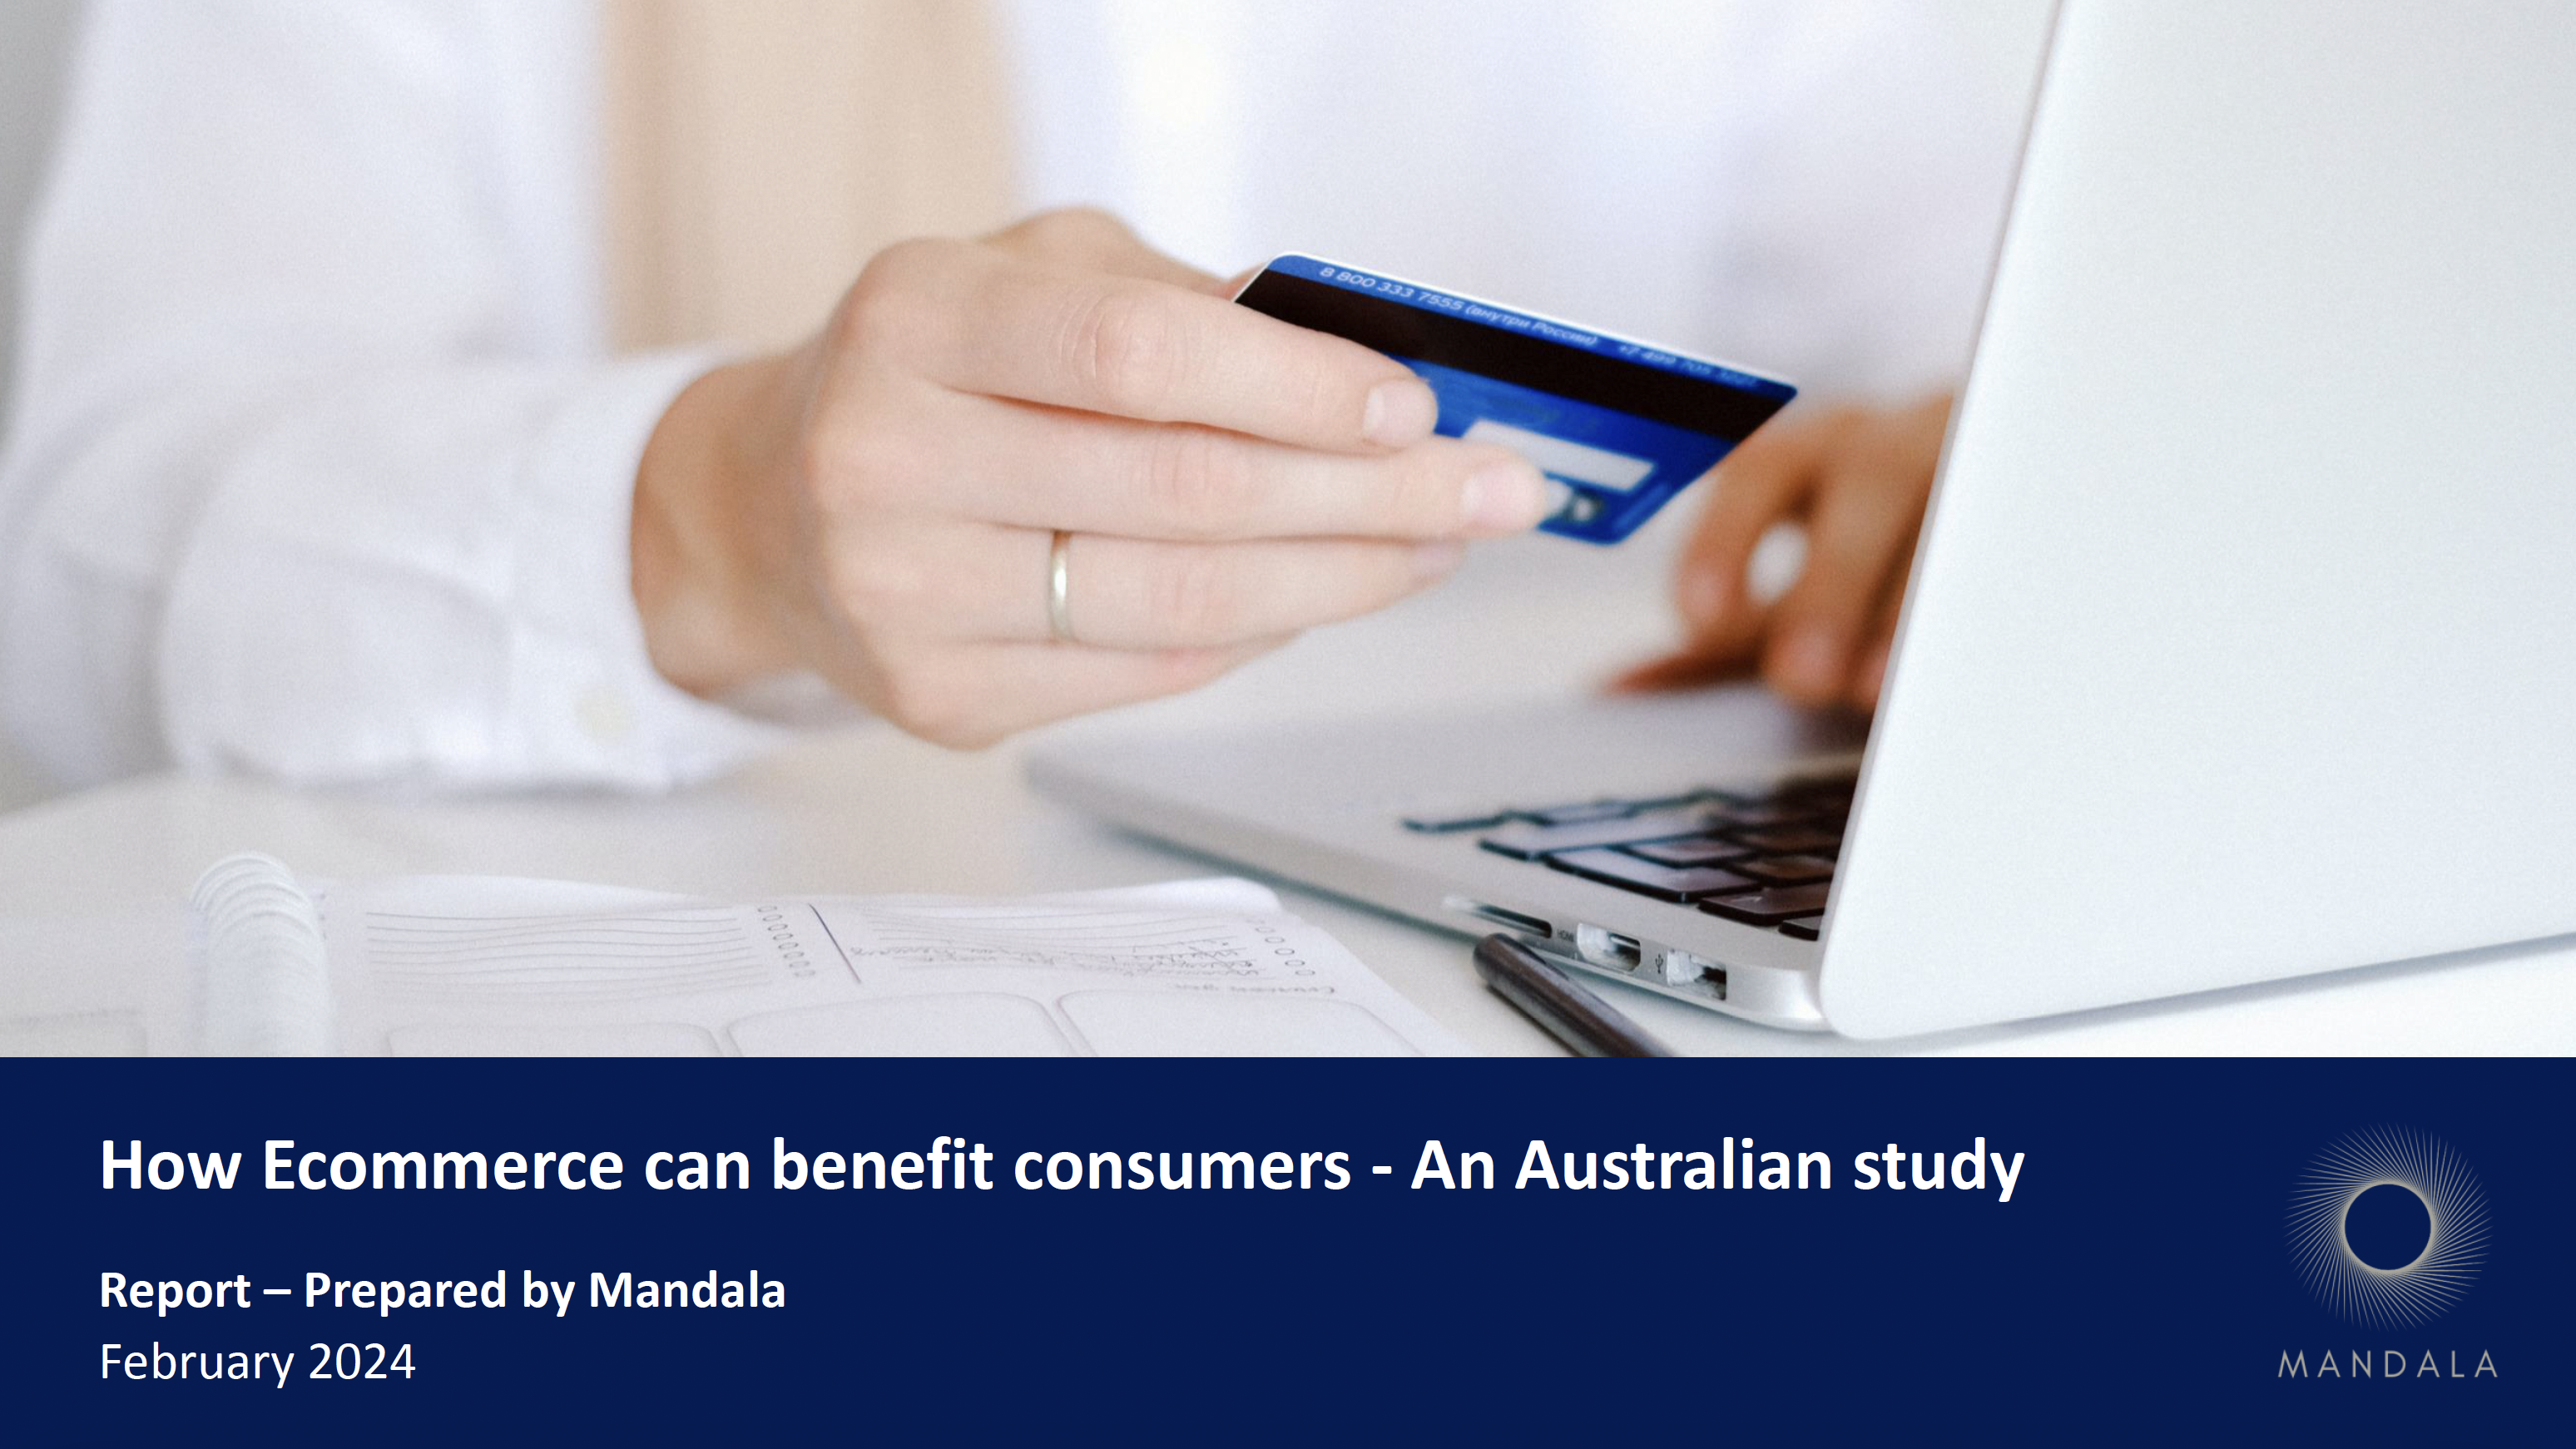 Dr. Adam Triggs, Partner, Mandala Partners & Non-resident fellow at Brookings and Australian National University (ANU), Canberra on ‘How Ecommerce can benefit consumers - A Australian study’